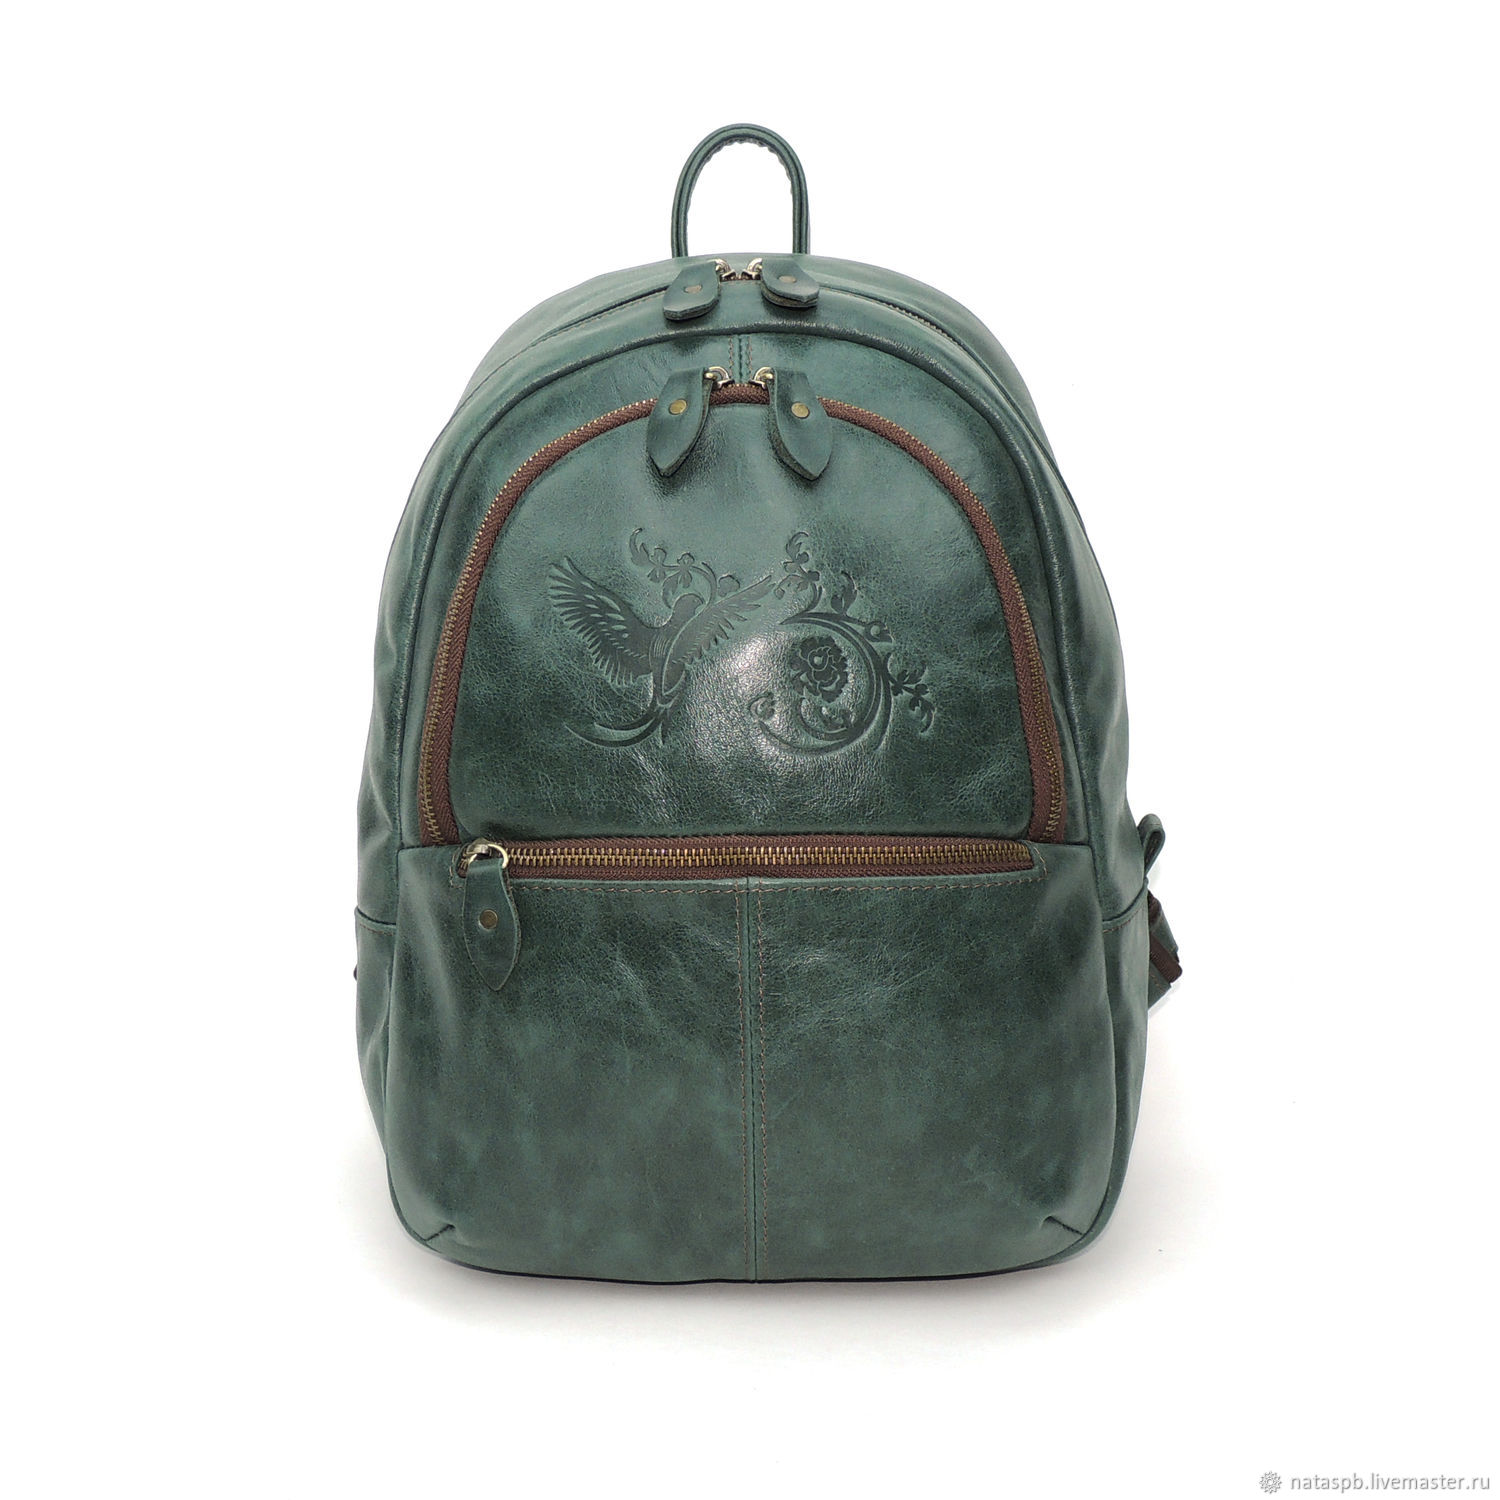  Women's leather backpack dark green with malachite pockets, Backpacks, St. Petersburg,  Фото №1